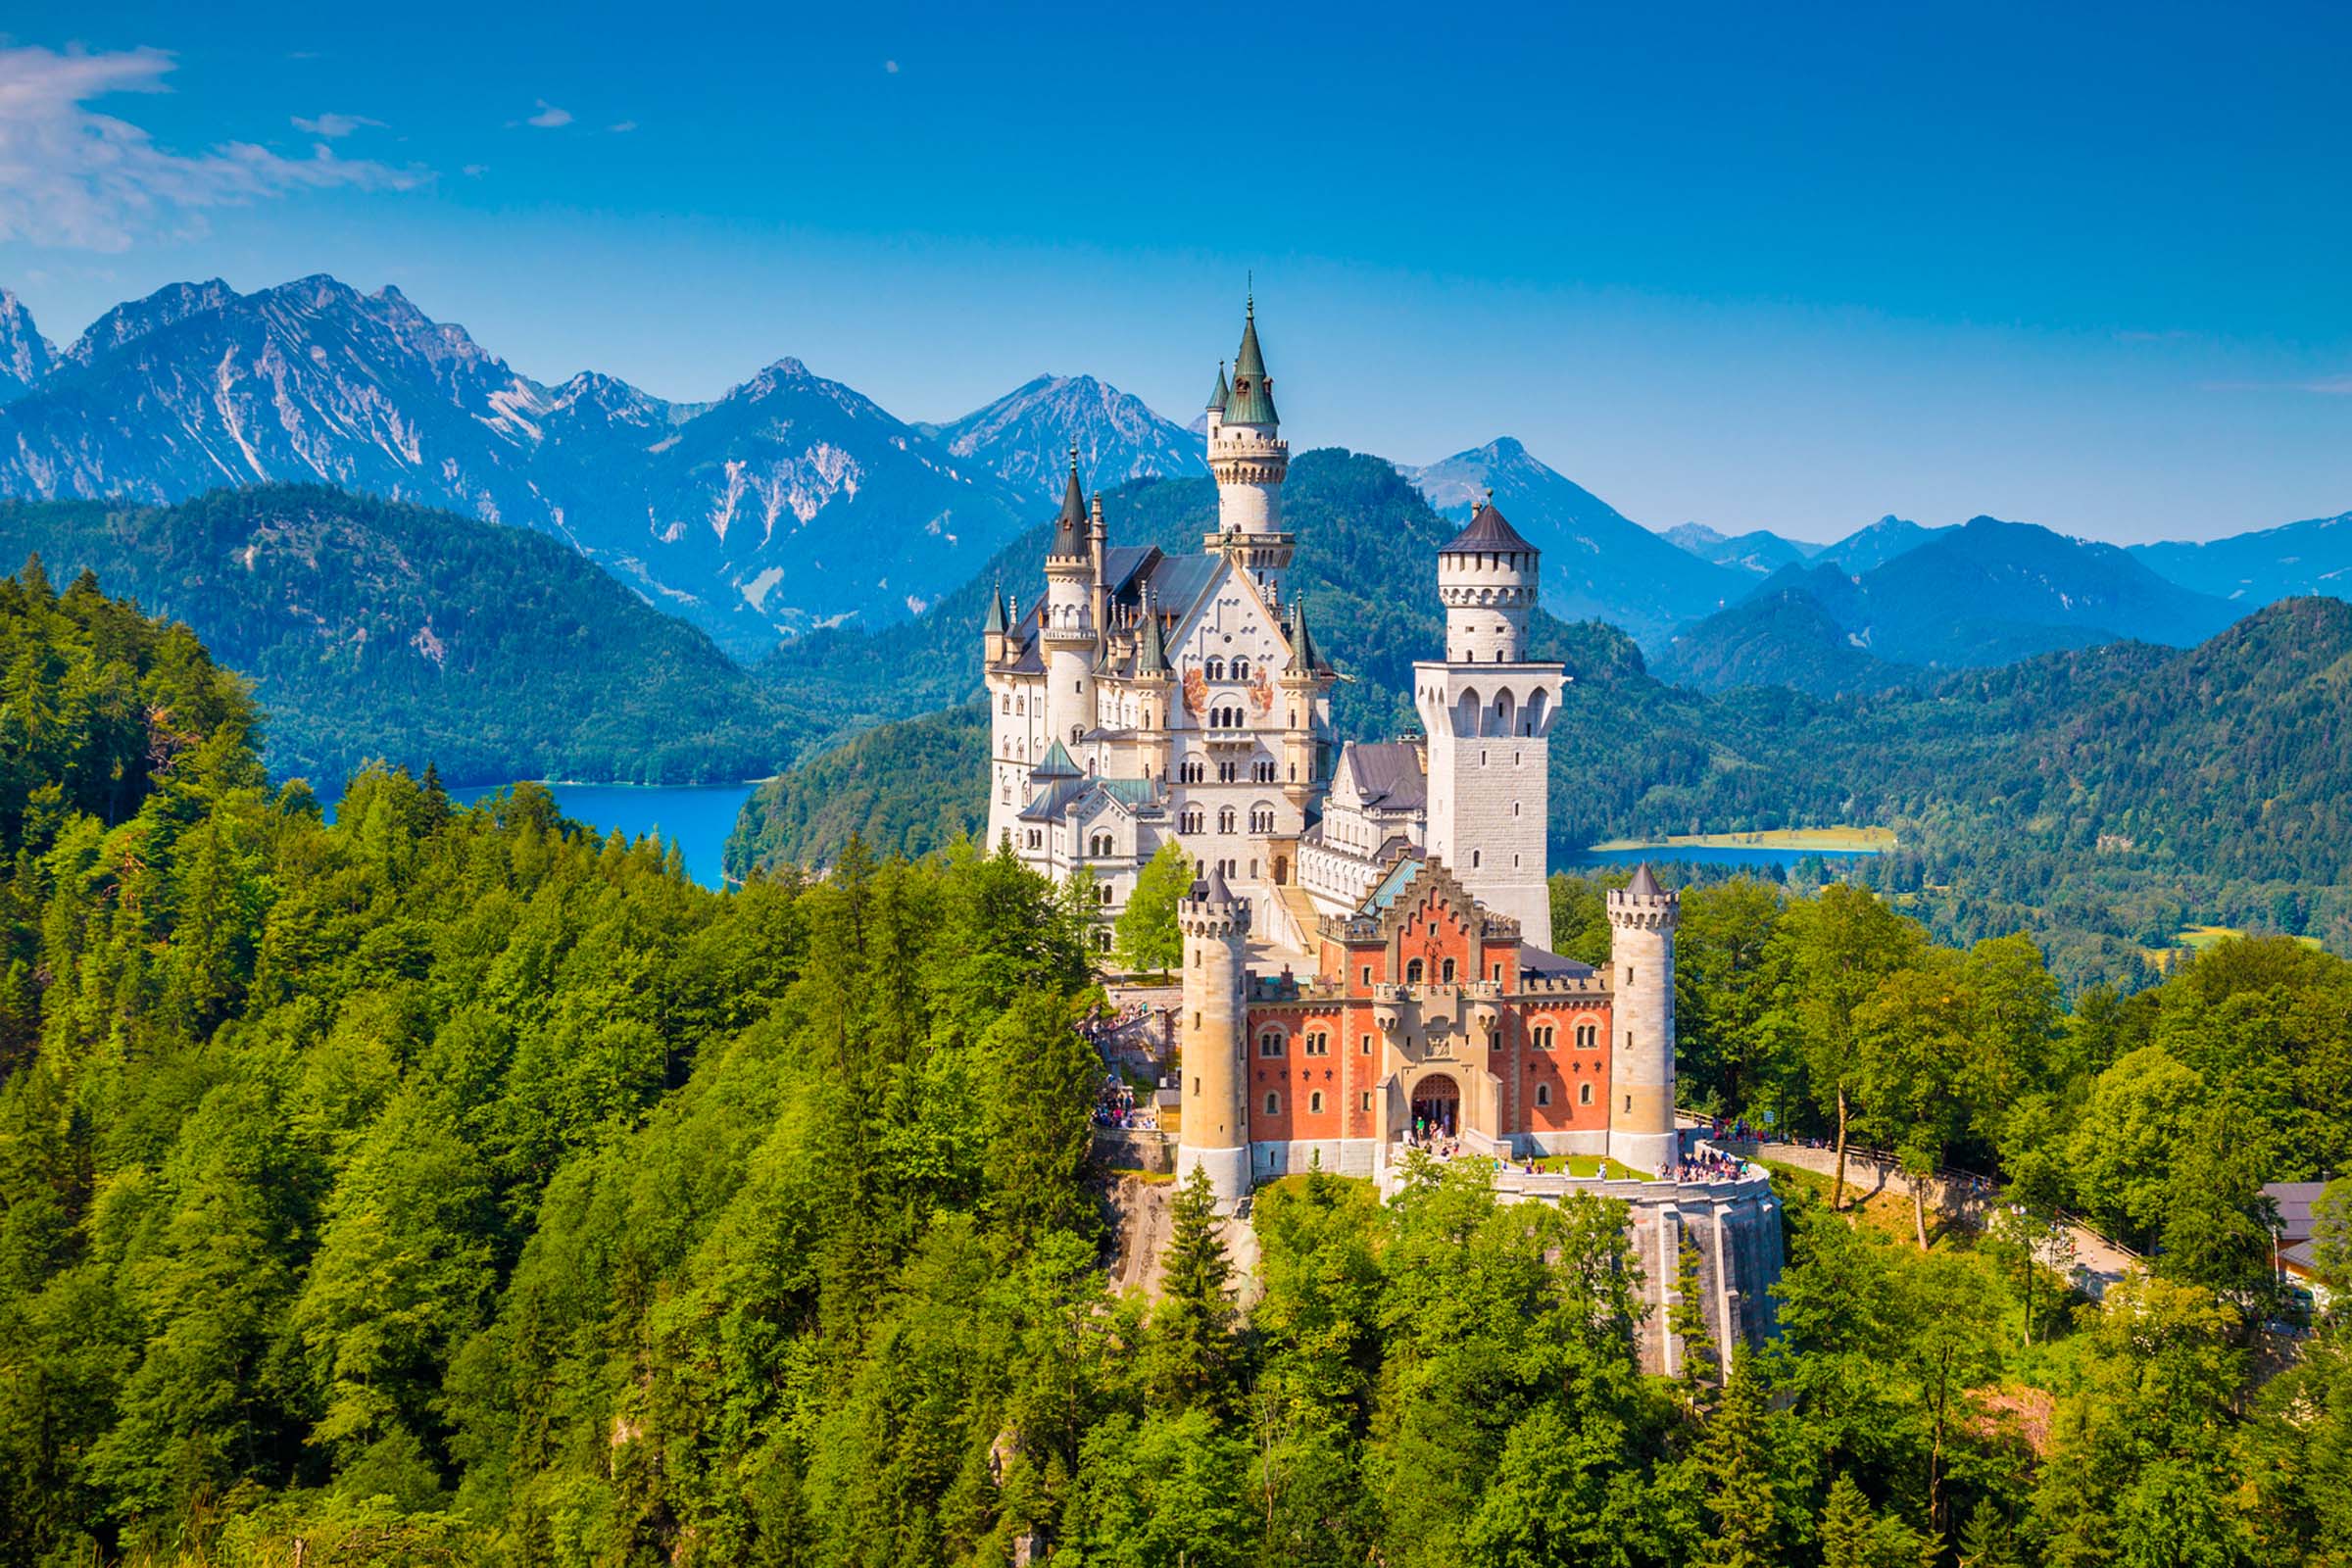 Famous Neuschwanstein Castle with its scenic mountain landscape